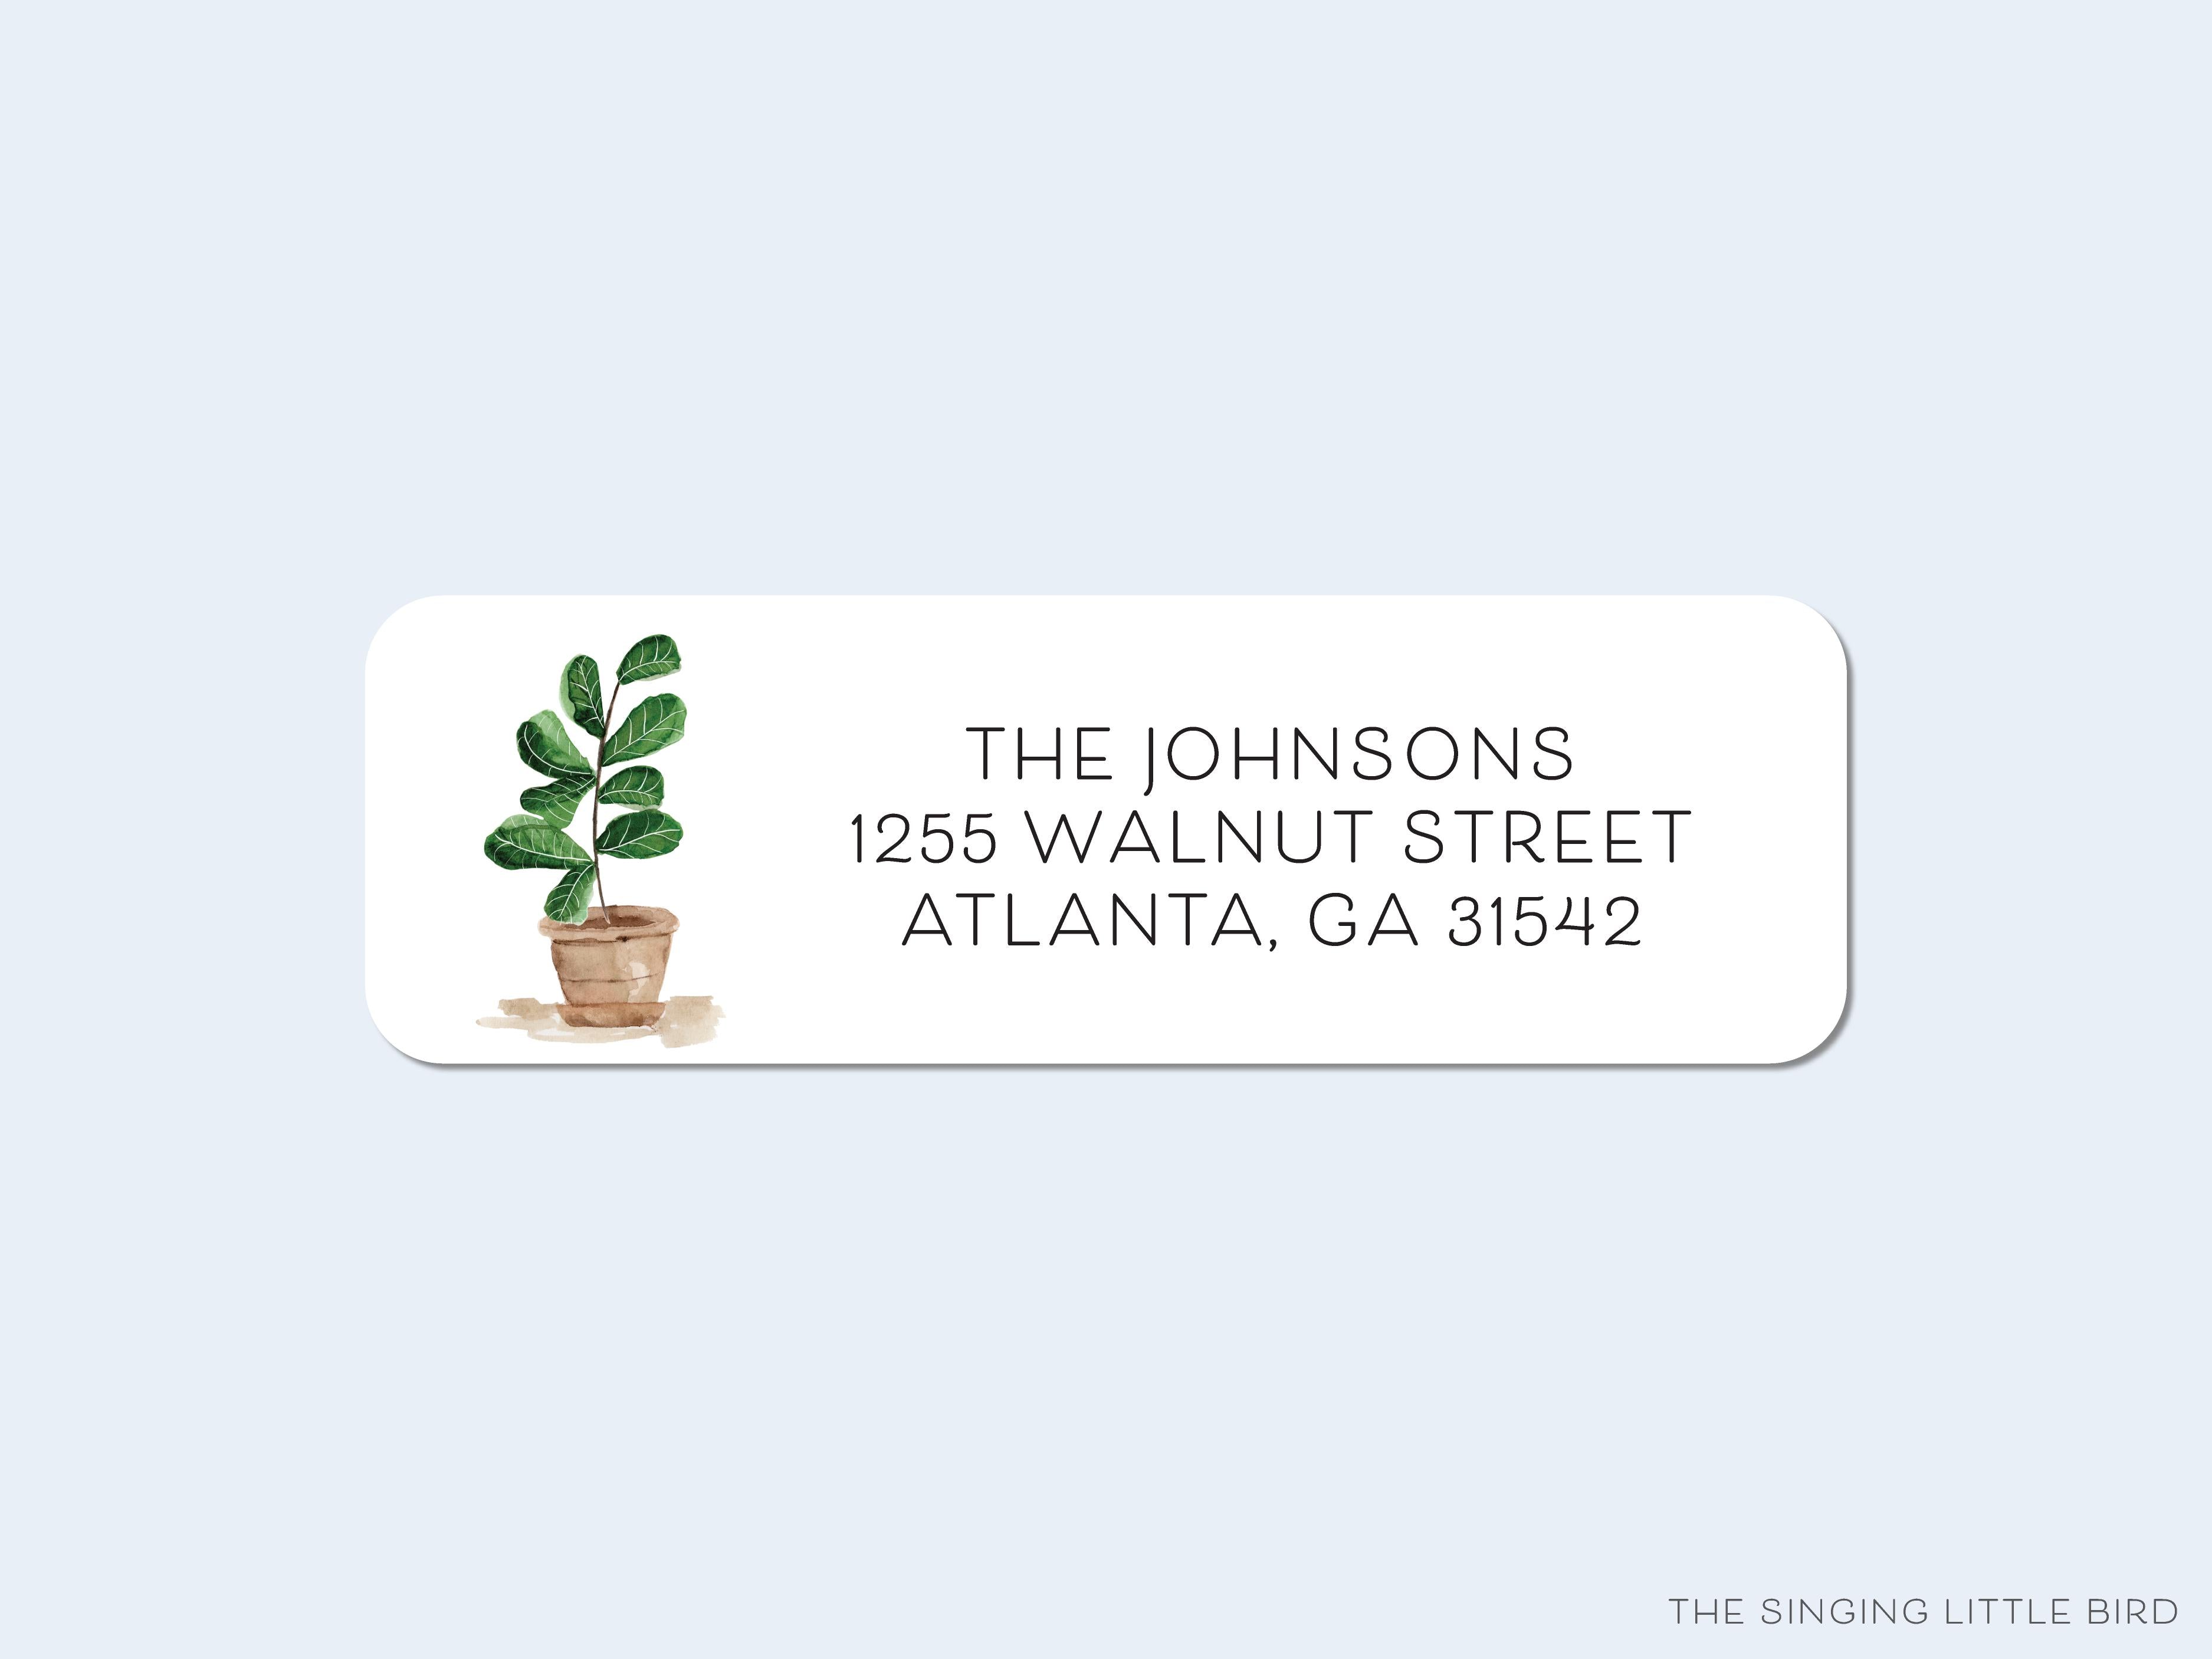 Fiddle Leaf Fig Return Address Labels-These personalized return address labels are 2.625" x 1" and feature our hand-painted watercolor fiddle leaf fig, printed in the USA on beautiful matte finish labels. These make gifts for yourself or the potted plant lover. -The Singing Little Bird